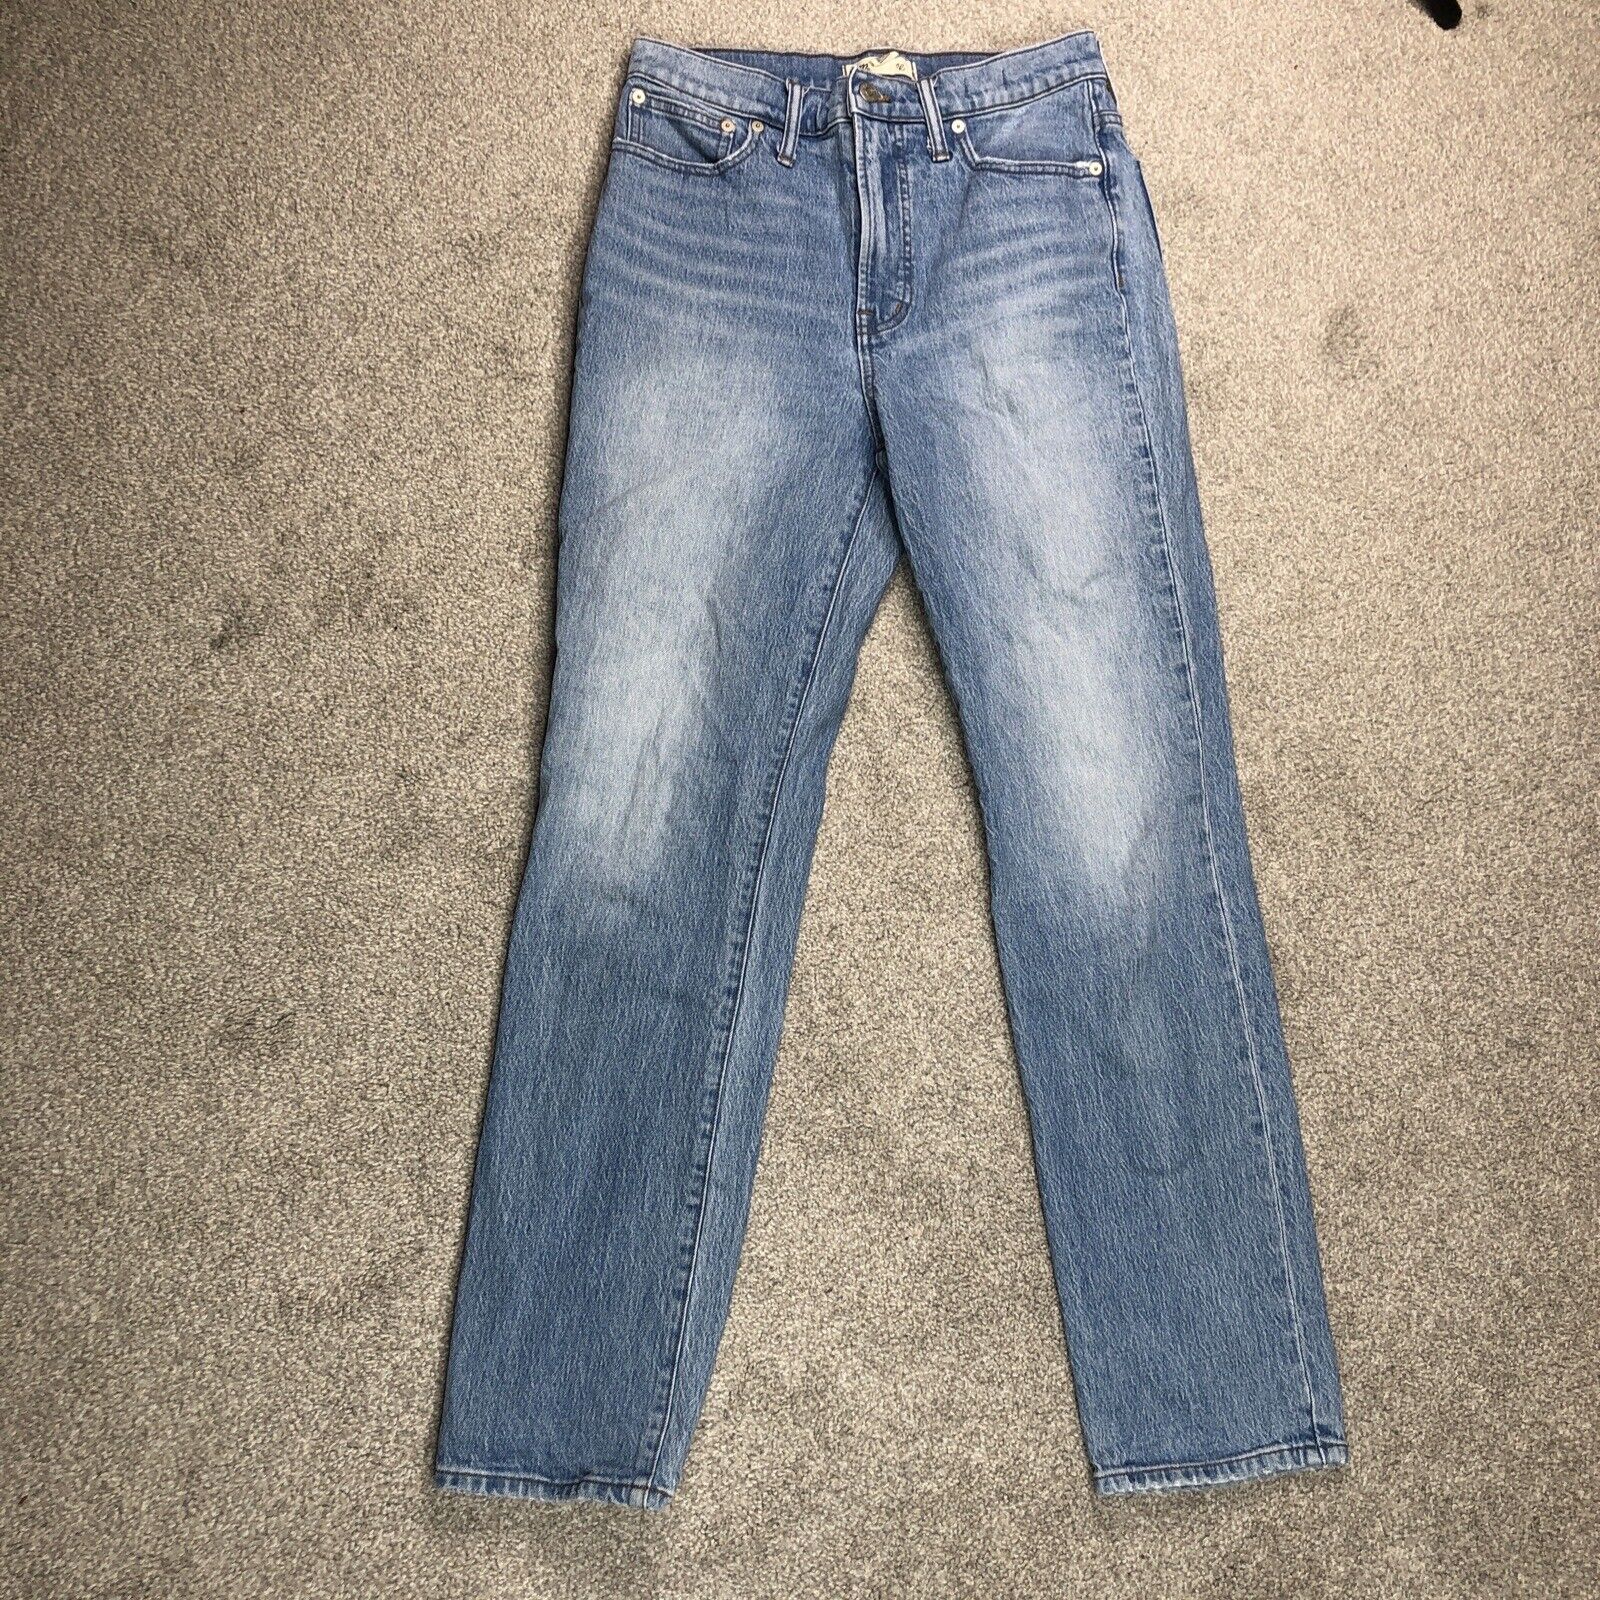 Madewell Jeans The Perfect Vintage Full Length Blue Color High Rise Sz 28